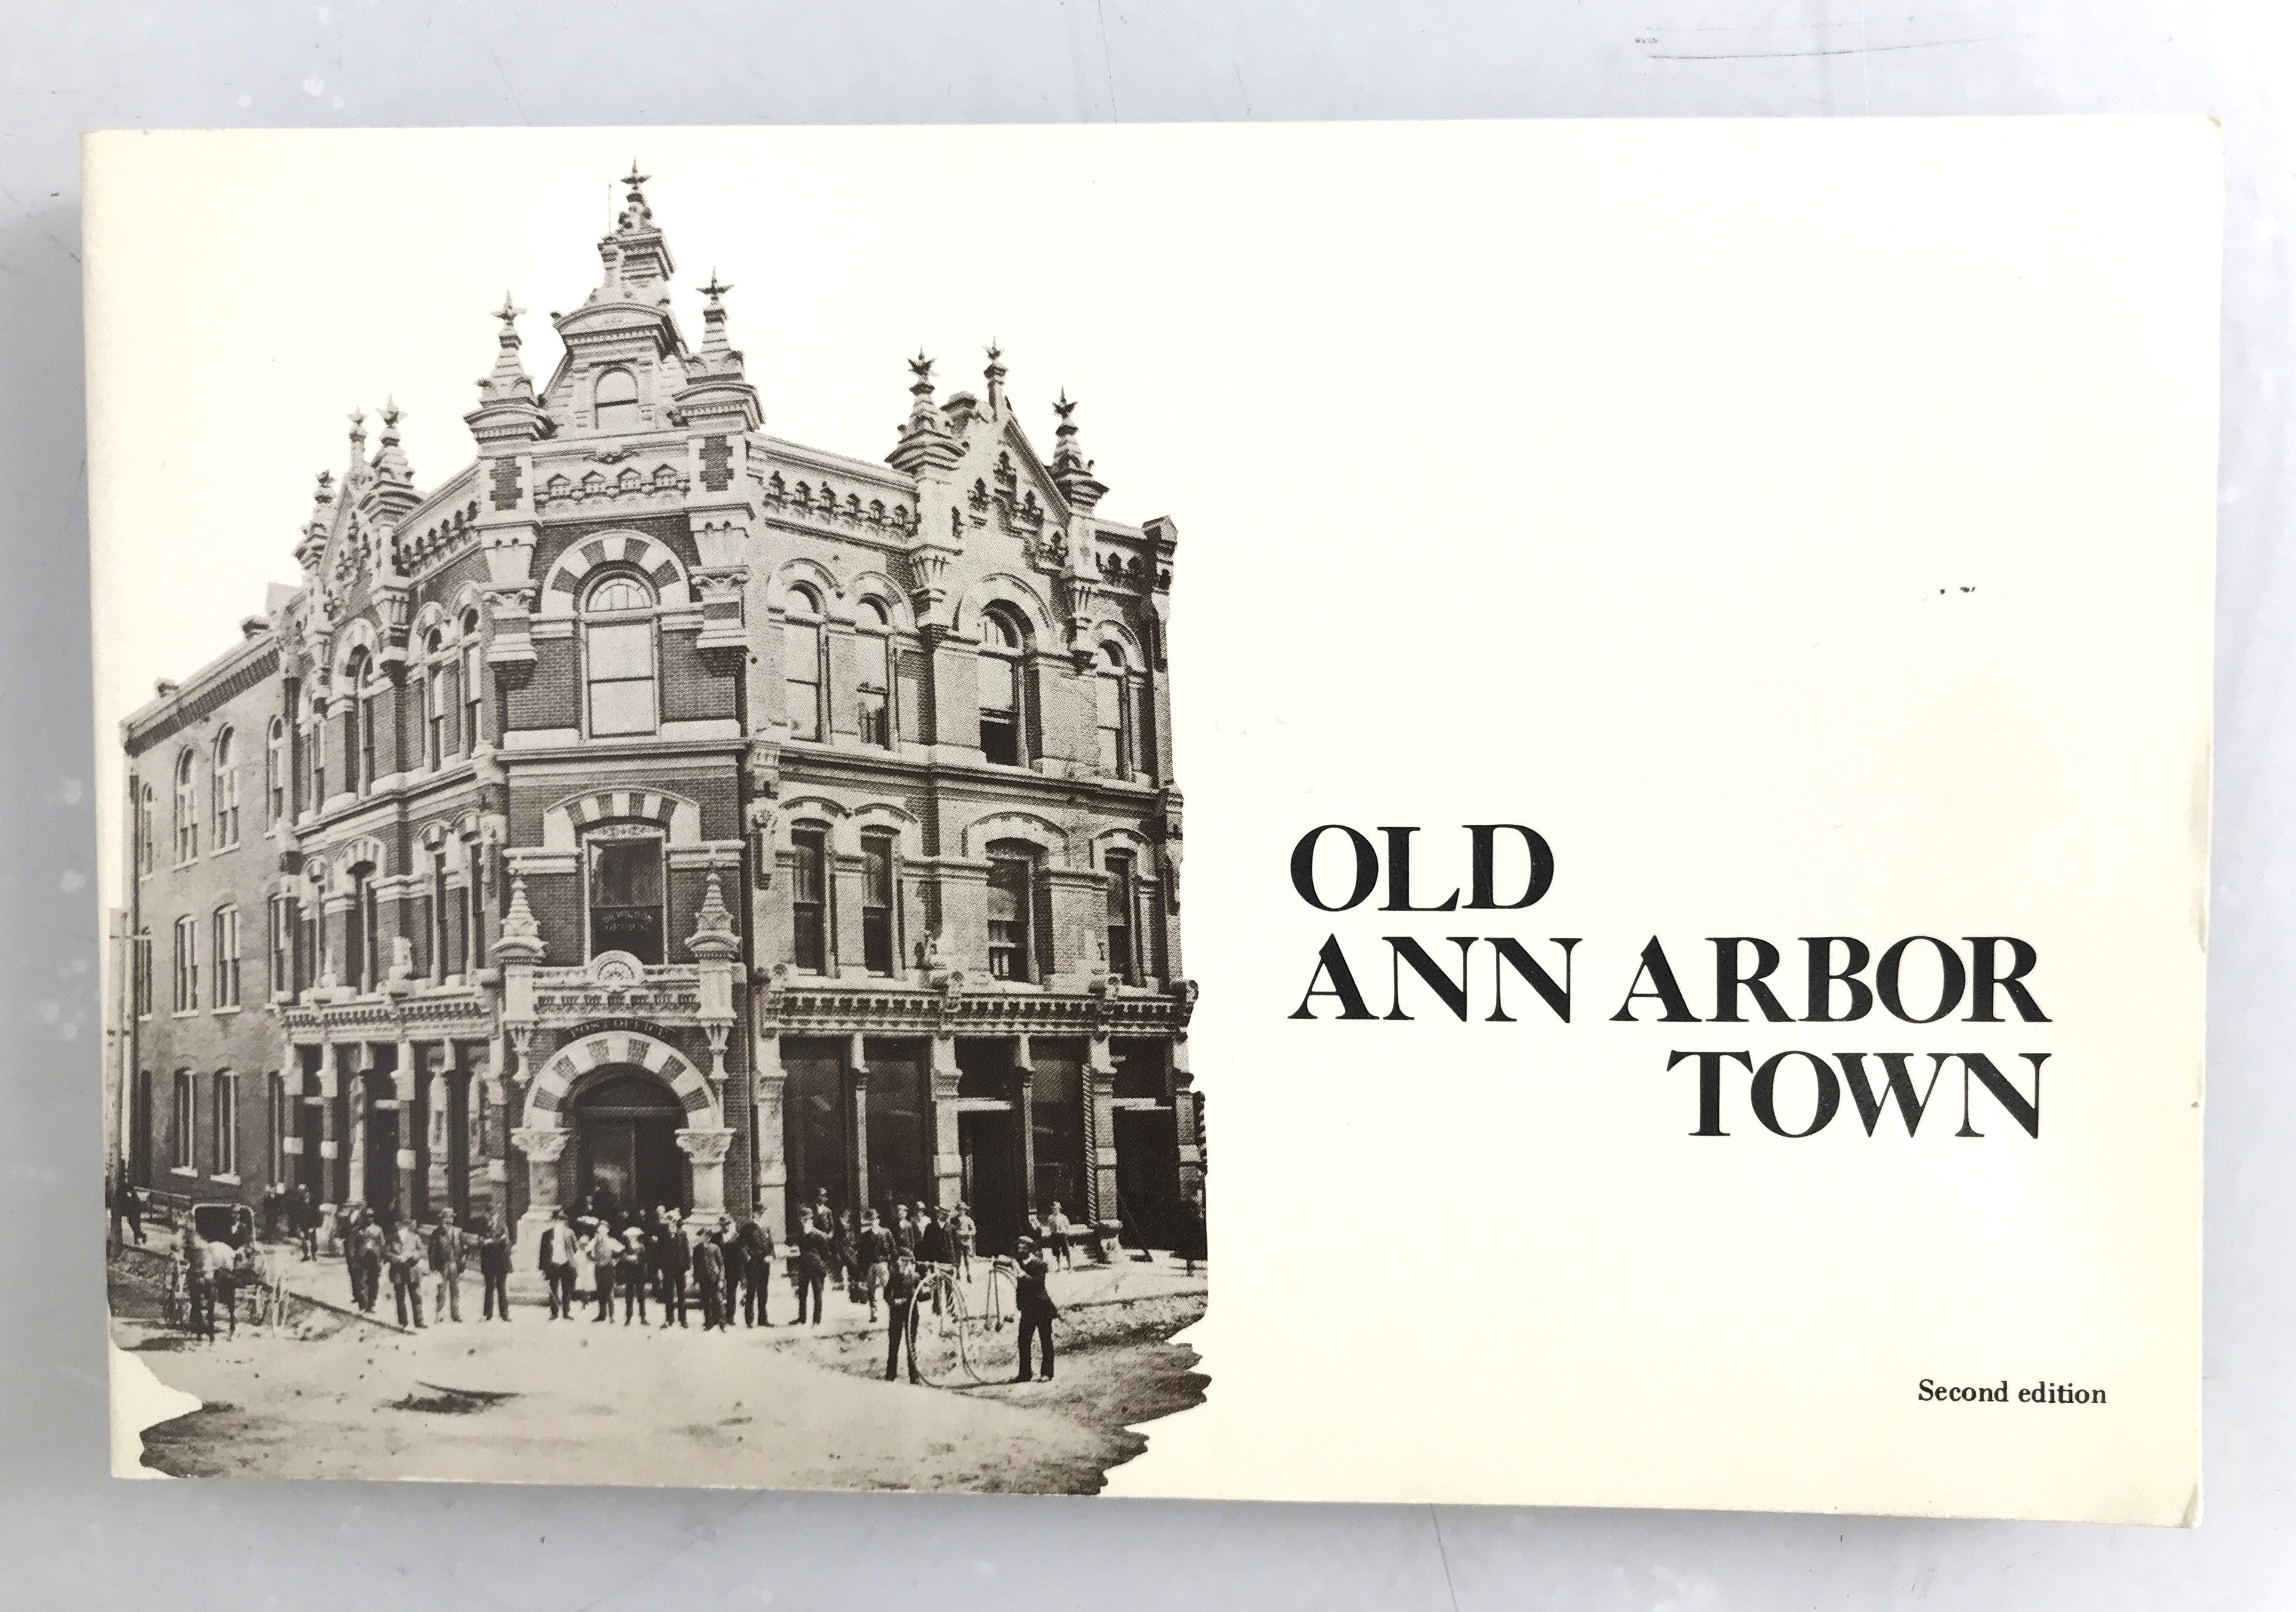 Old Ann Arbor Town by Hazel Proctor Second Edition 1981 SC